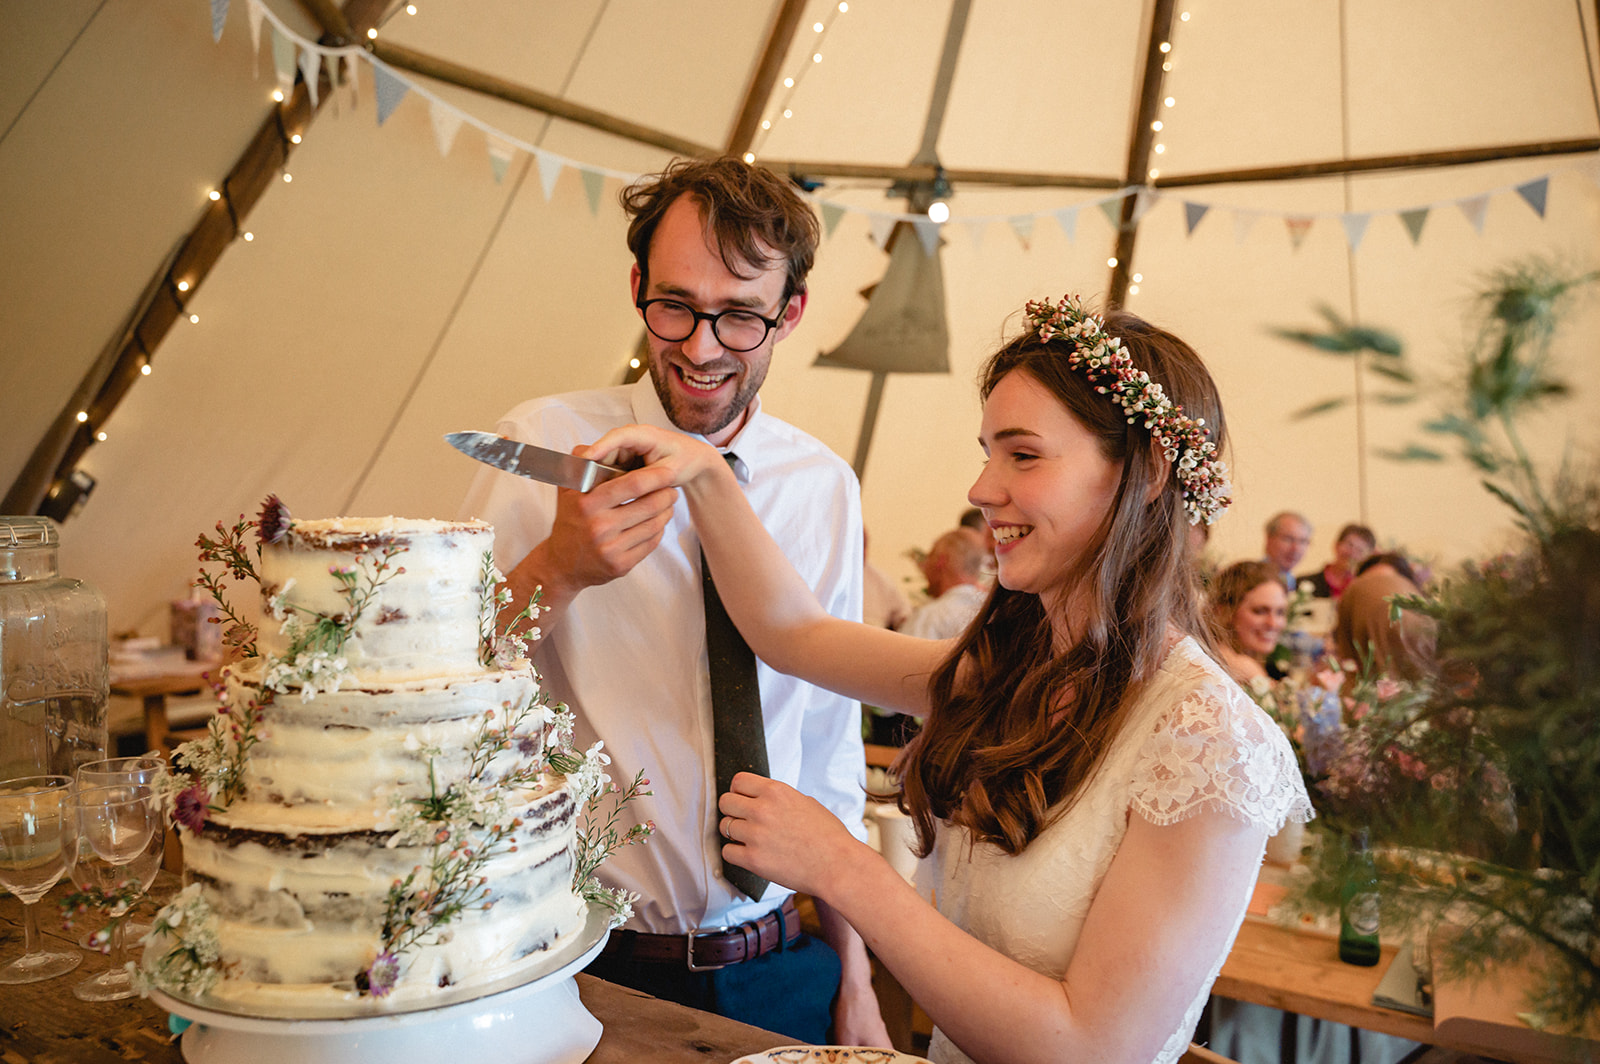 Candid portrait of Eleanor & Hartley slicing the cake wedding reception at St. Paul's Walden Bury 